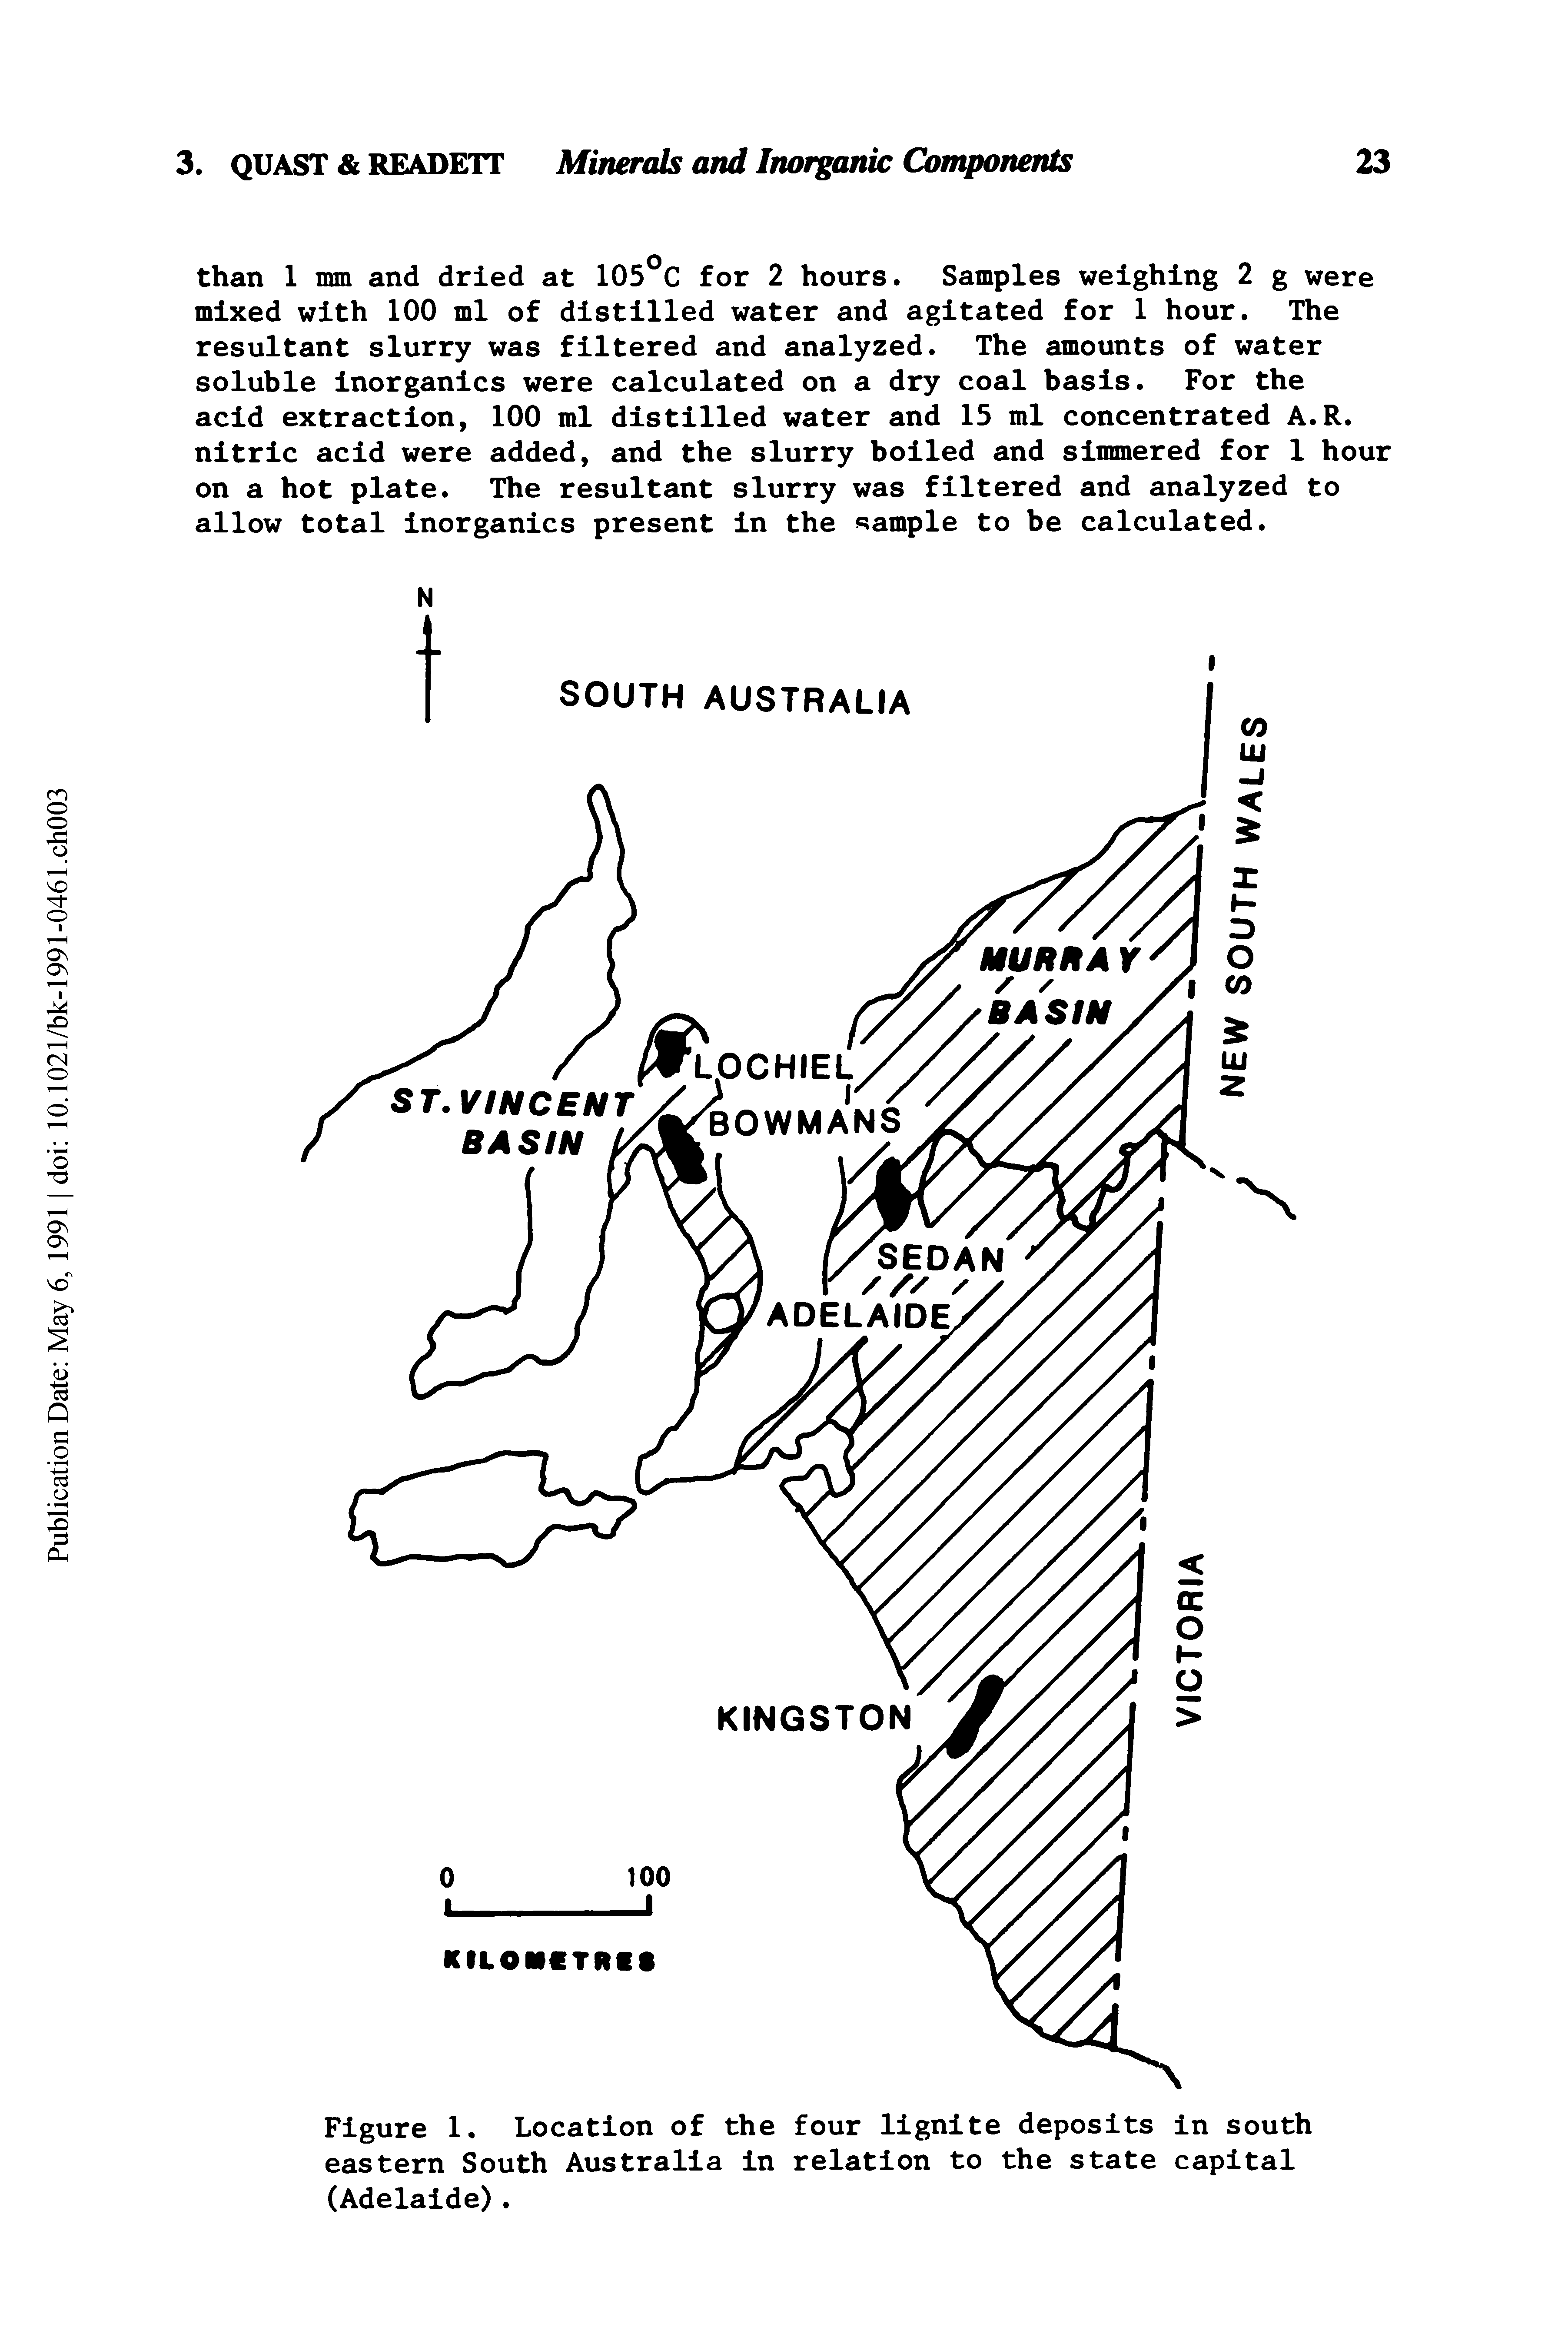 Figure 1. Location of the four lignite deposits in south eastern South Australia in relation to the state capital (Adelaide).